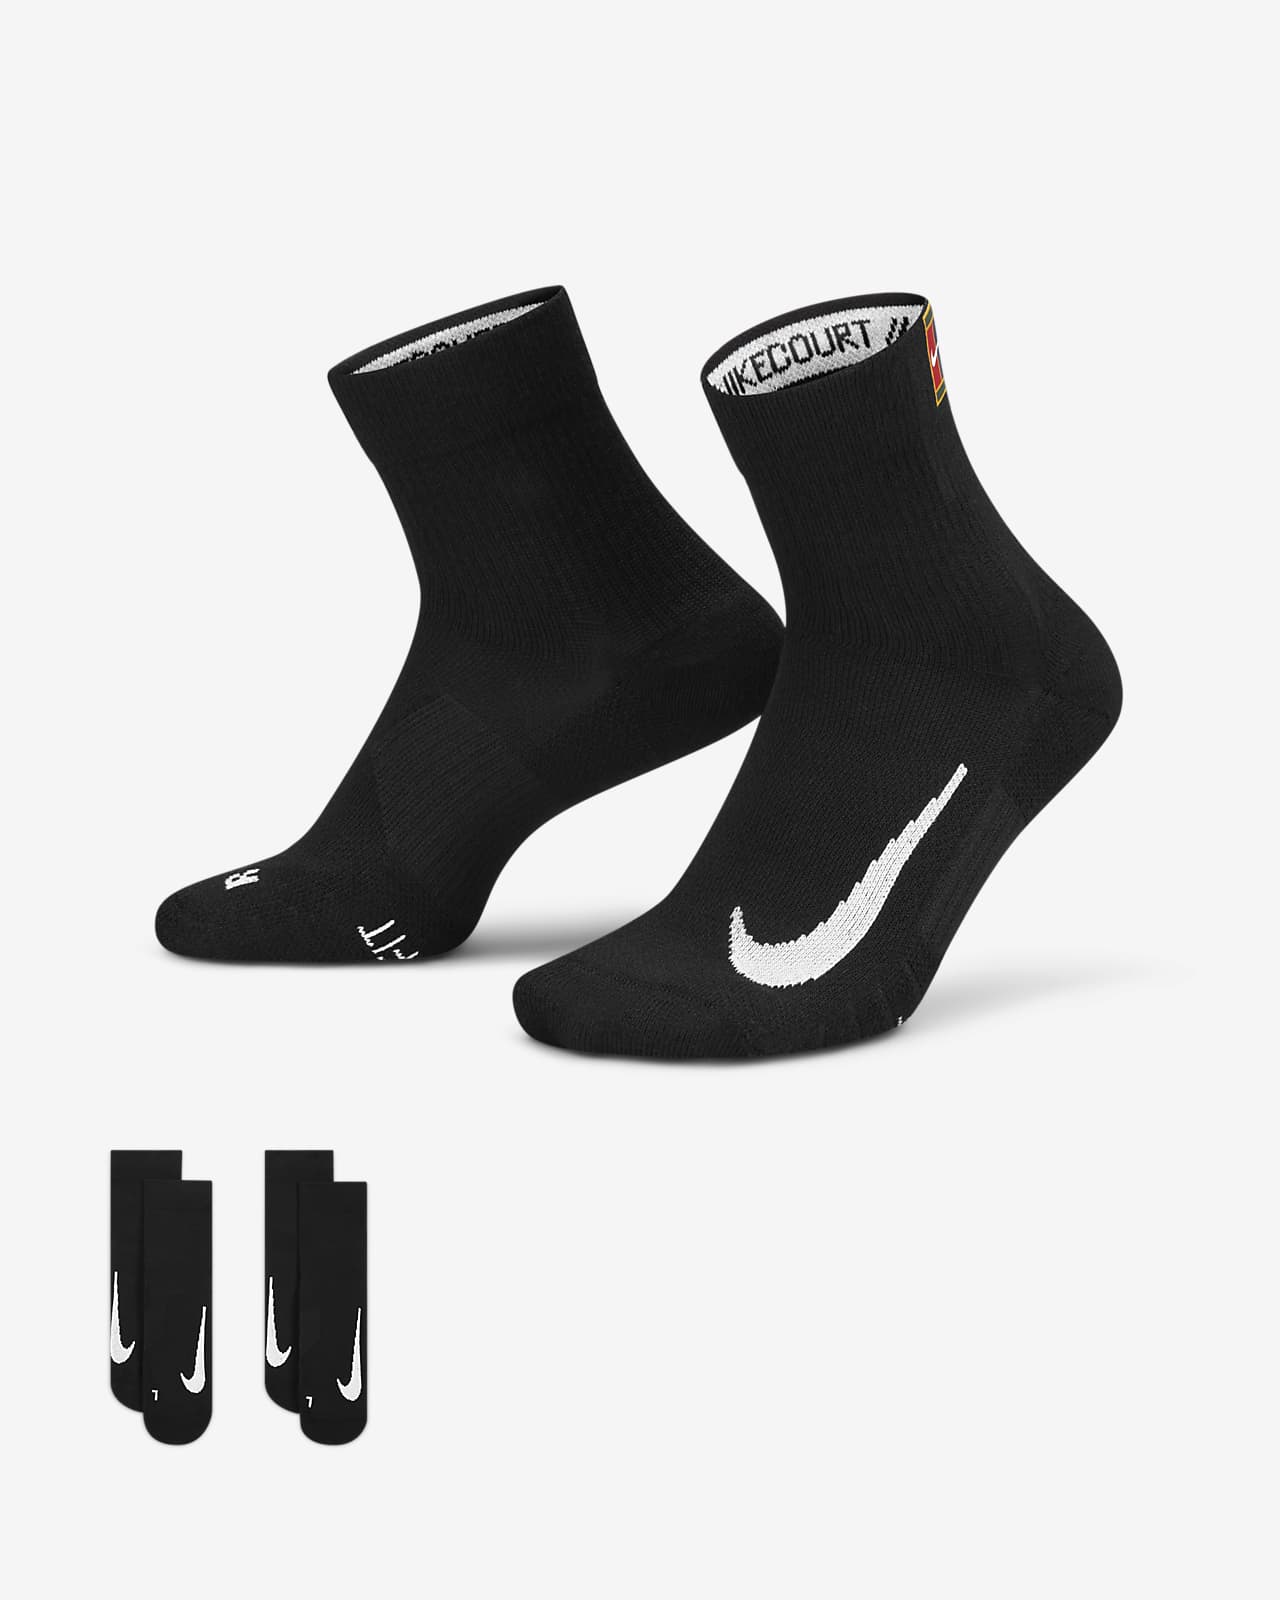 2 PARES DE CALCETINES NIKE COURT ANKLE - NIKE - Mujer - Ropa